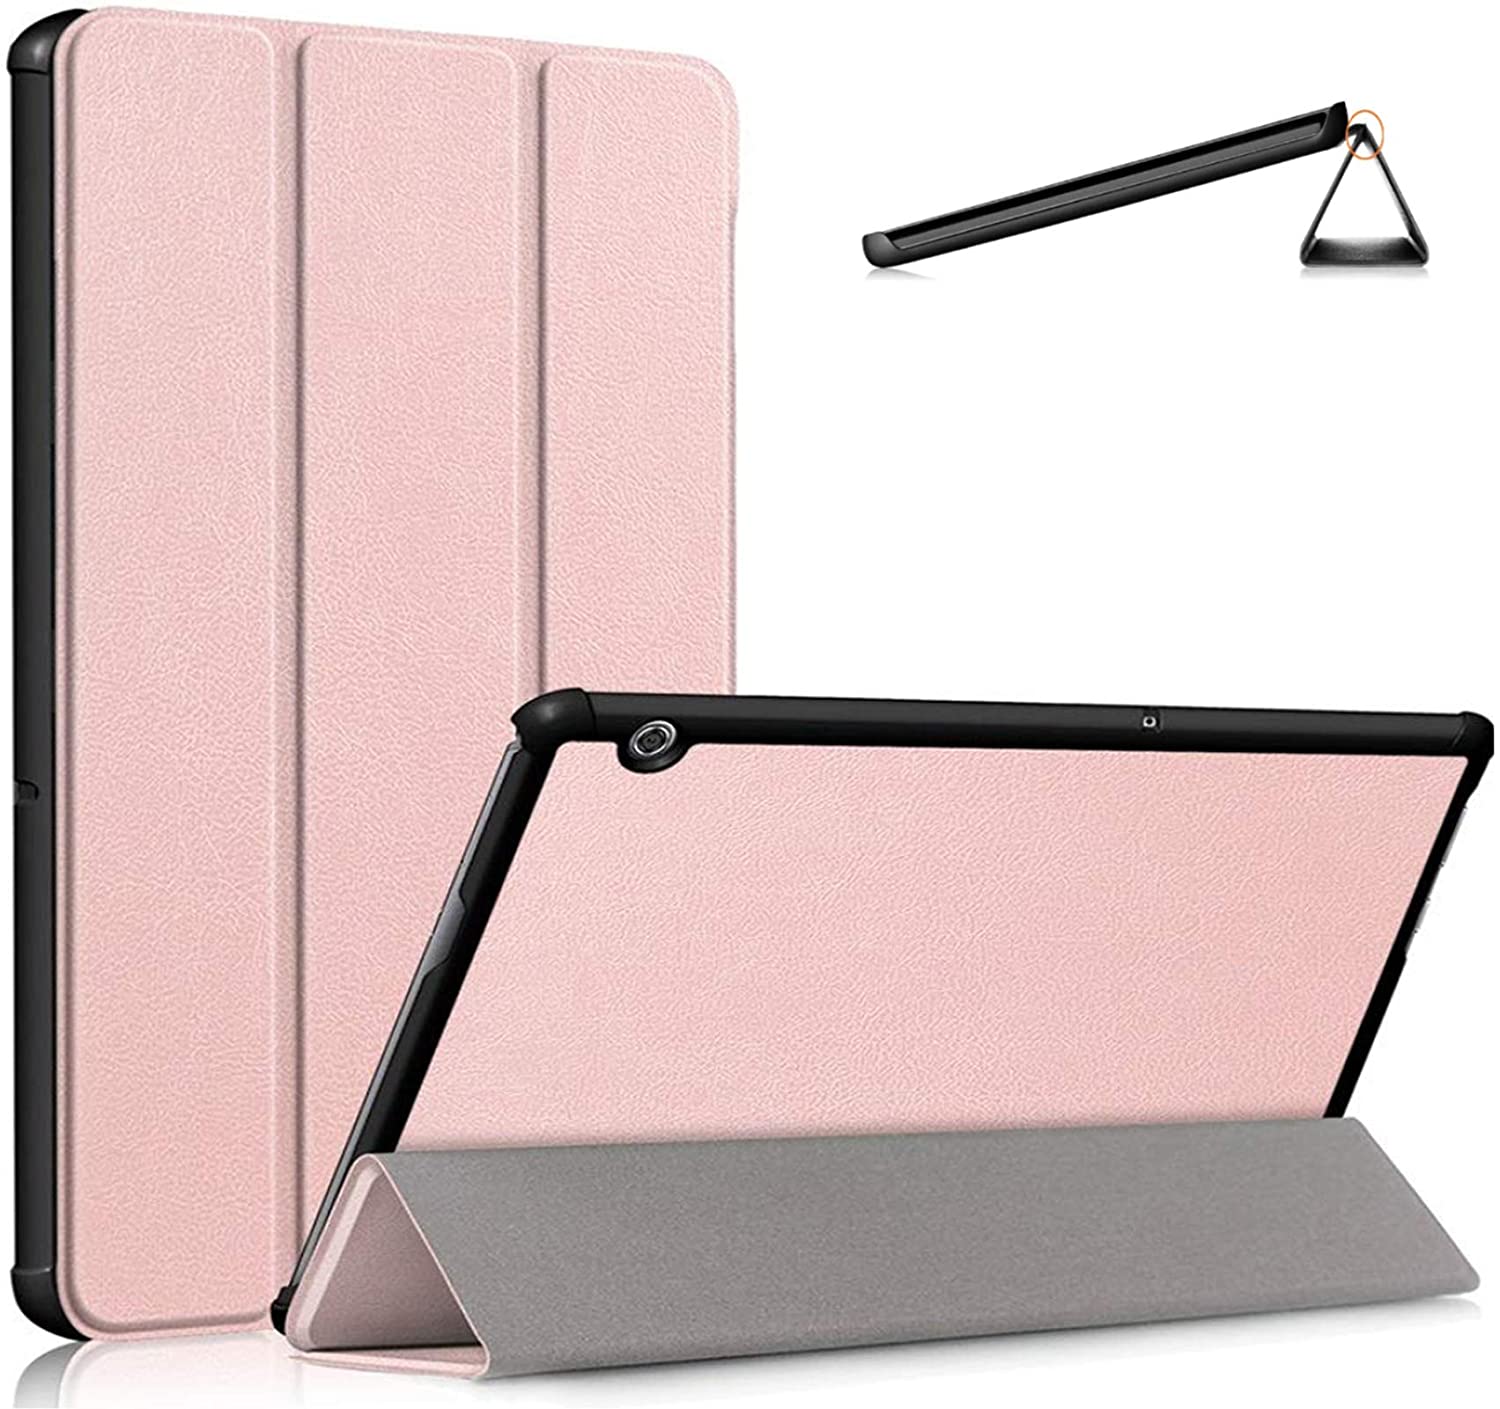 KATUMO Case for Huawei MediaPad T5 10 Tablet,Shock Resistant Slim Tri-Fold Shell Case Cover, Rose Pink. - e4cents